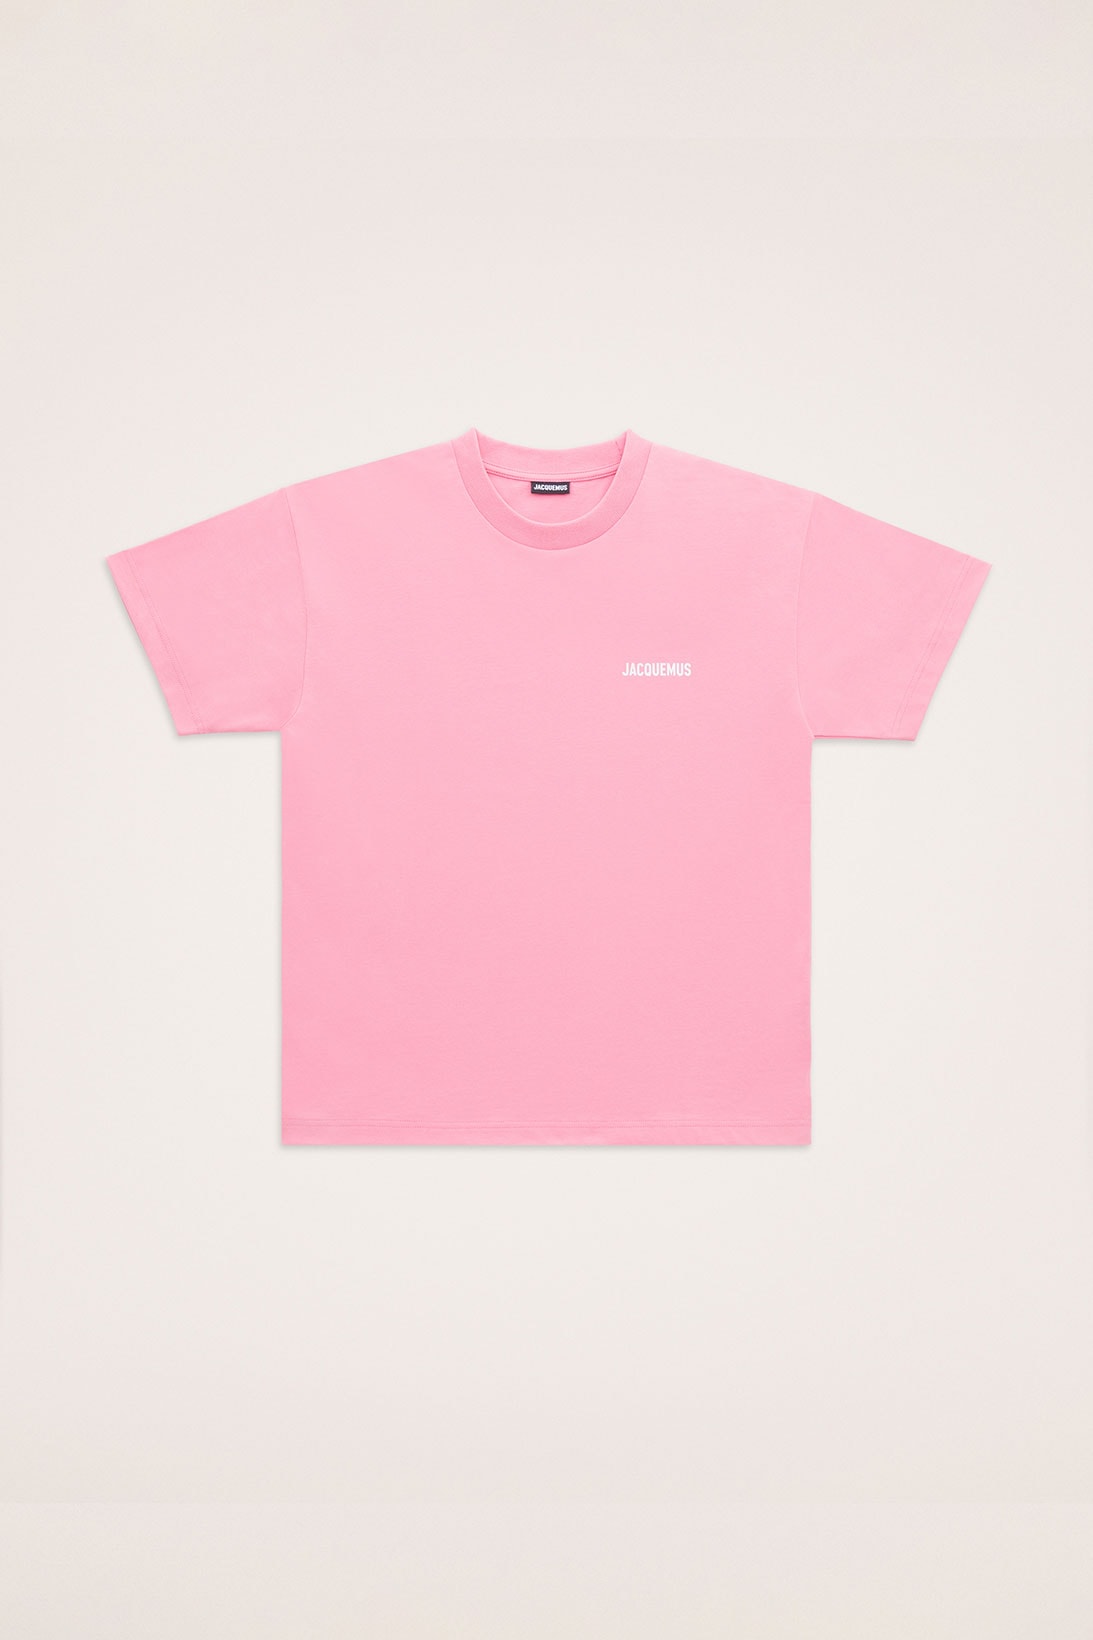 jacquemus pink holiday christmas capsule collection le chiquito key ring hoodies bucket hats release